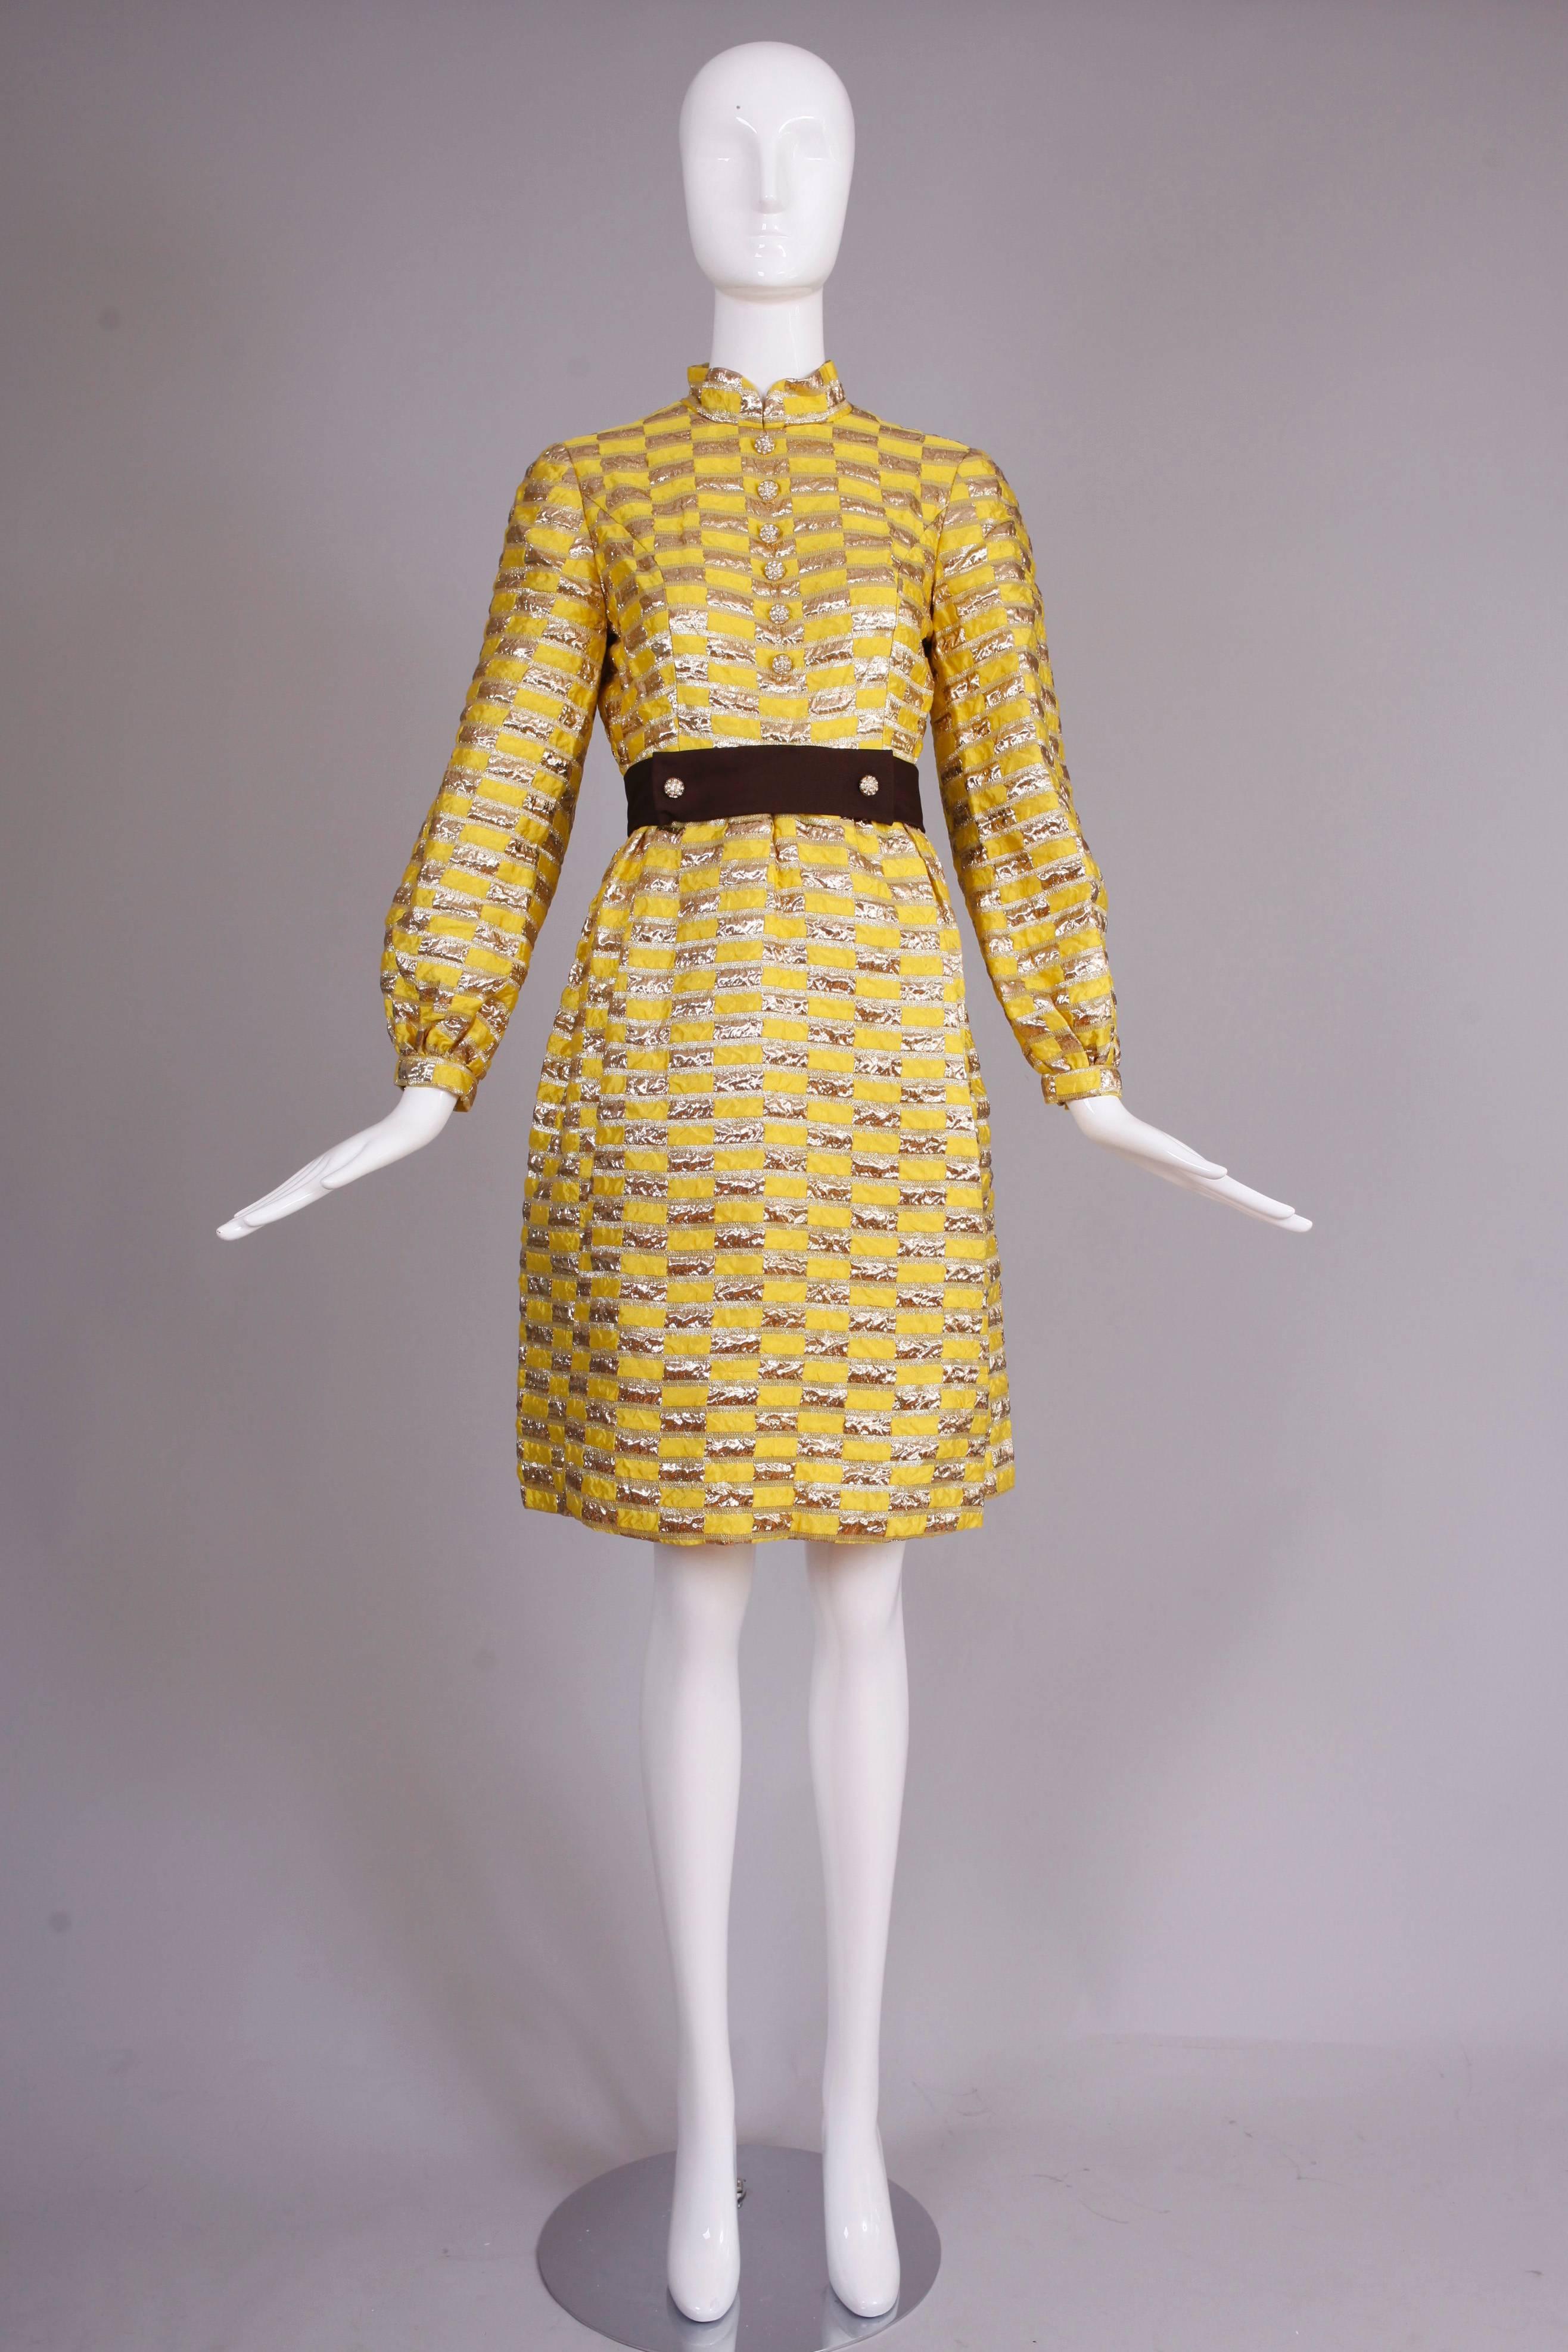 1970's Oscar de la Renta yellow and gold lame cocktail dress with chocolate brown attached belt and decorative half-domed rhinestone buttons. In excellent condition - one button is missing one rhinestone. Size tag 6 please consult